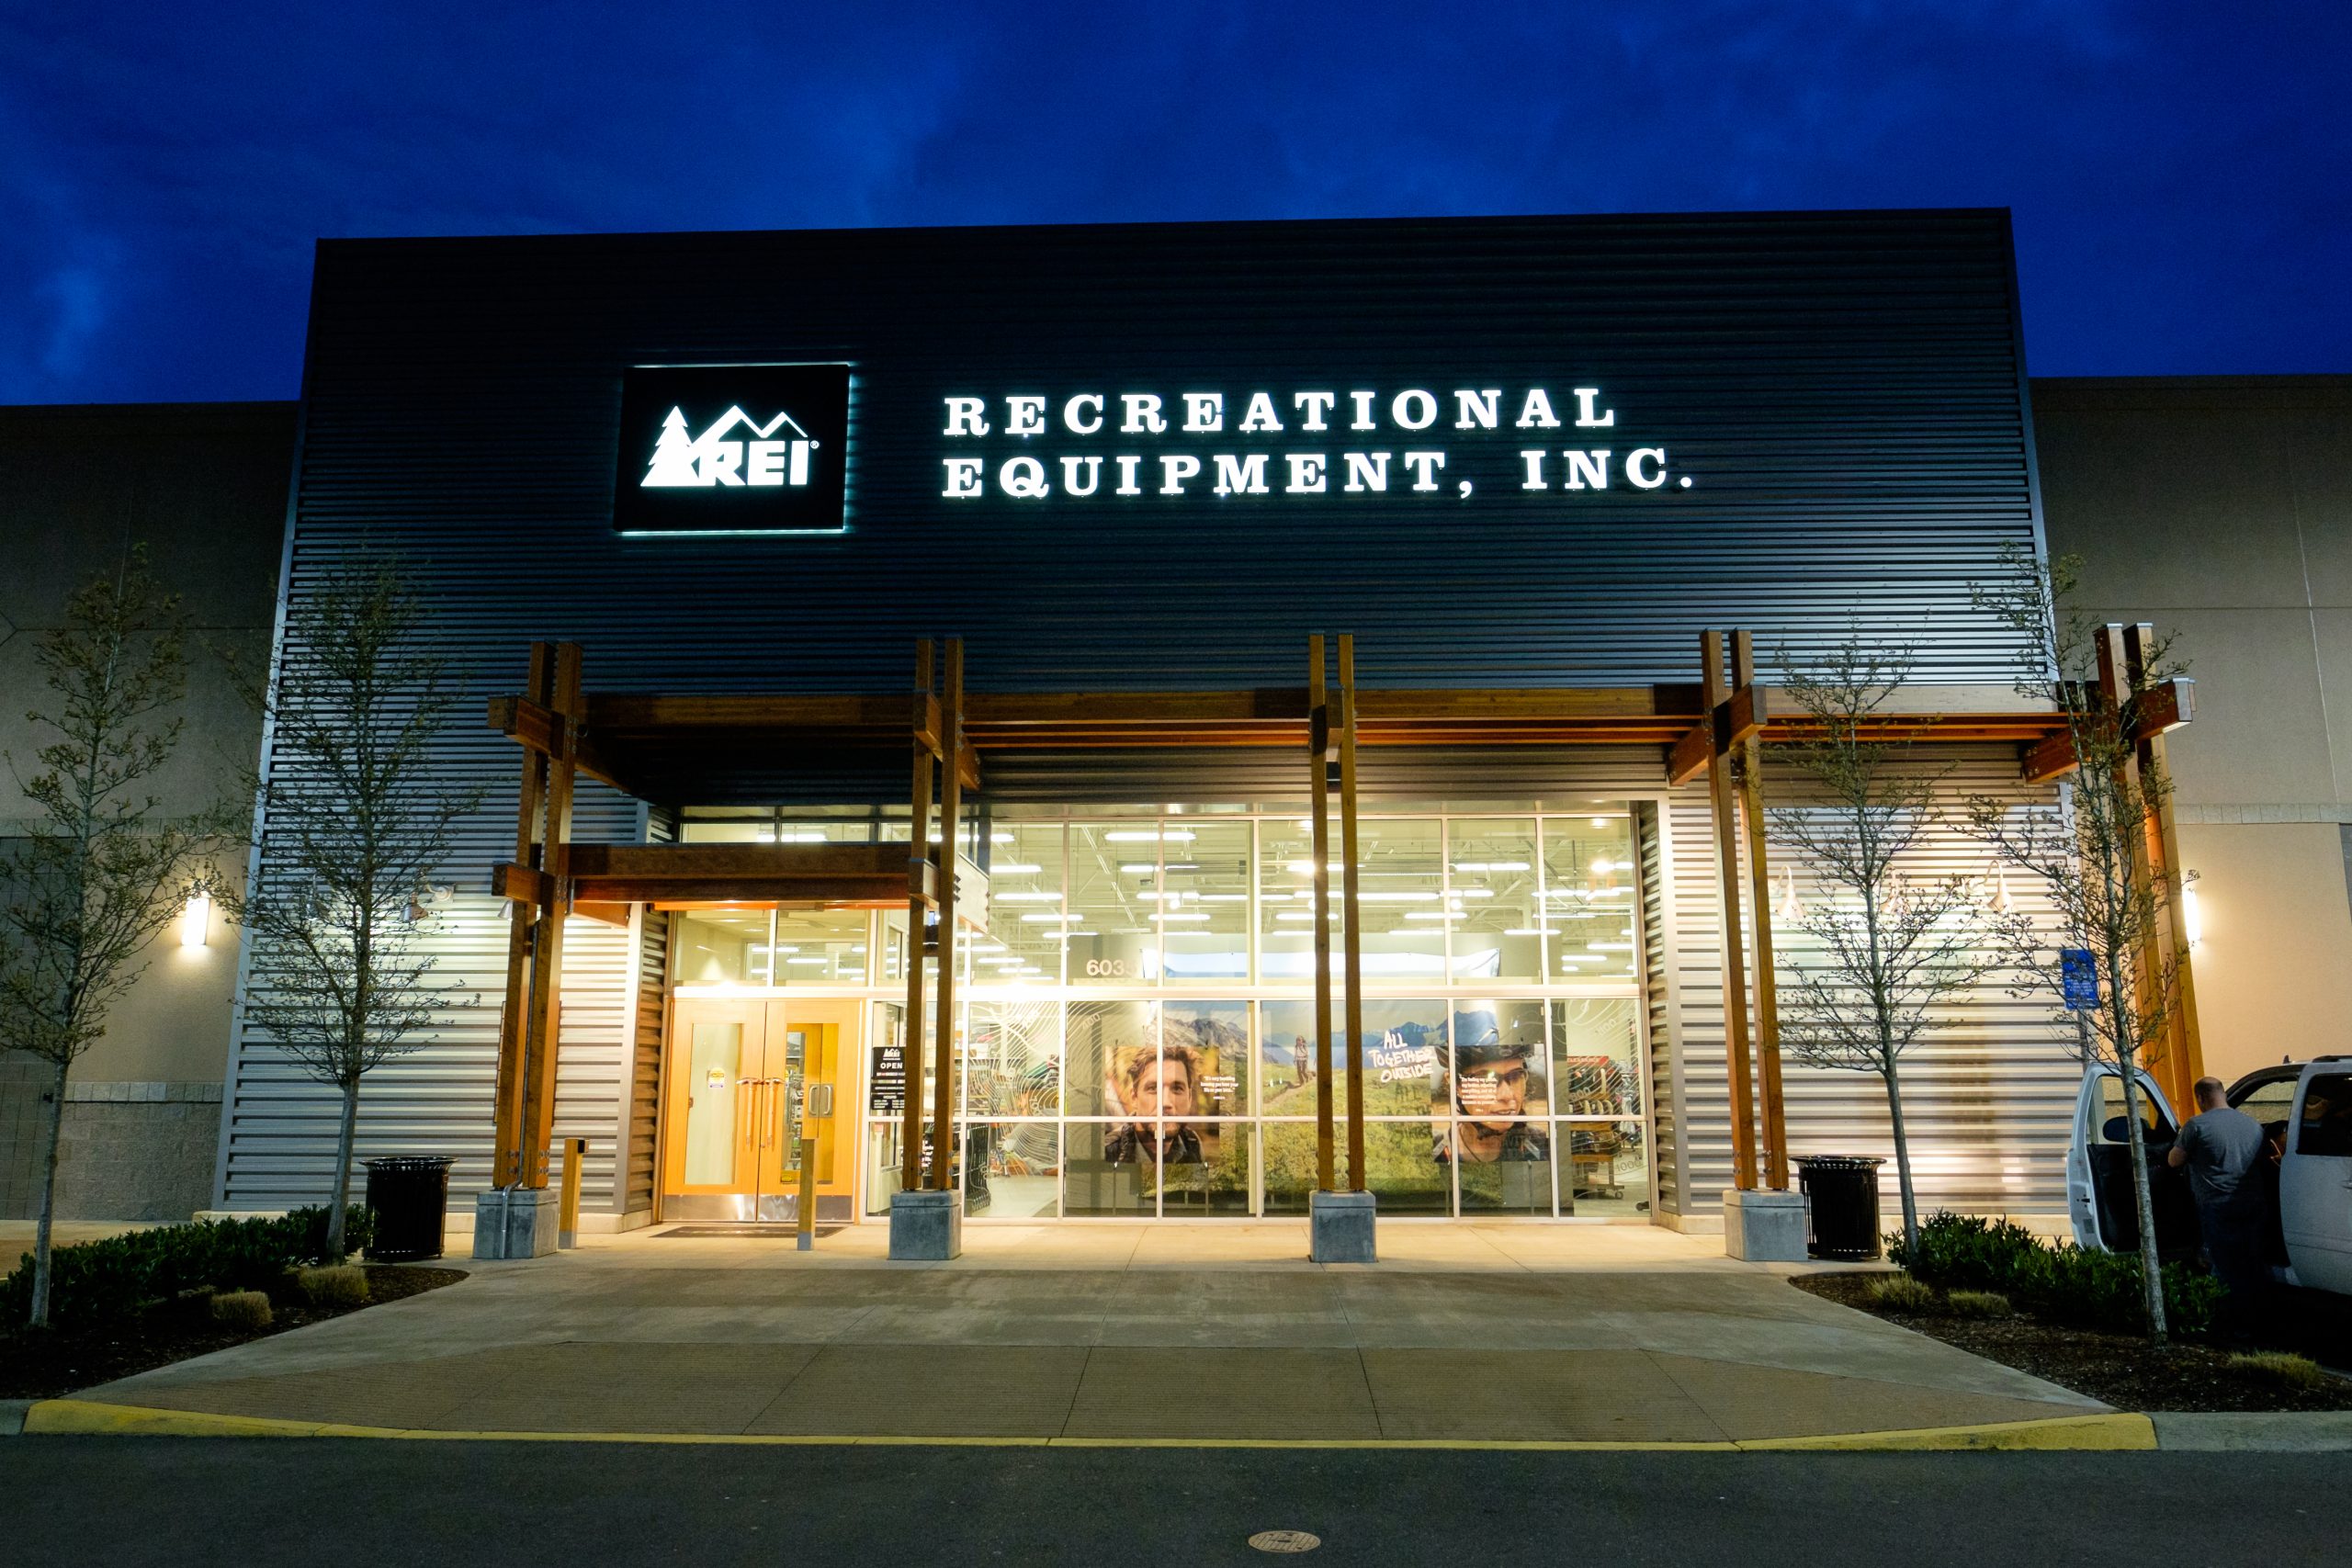 Workers boarding up the REI Flagship store in New York during the